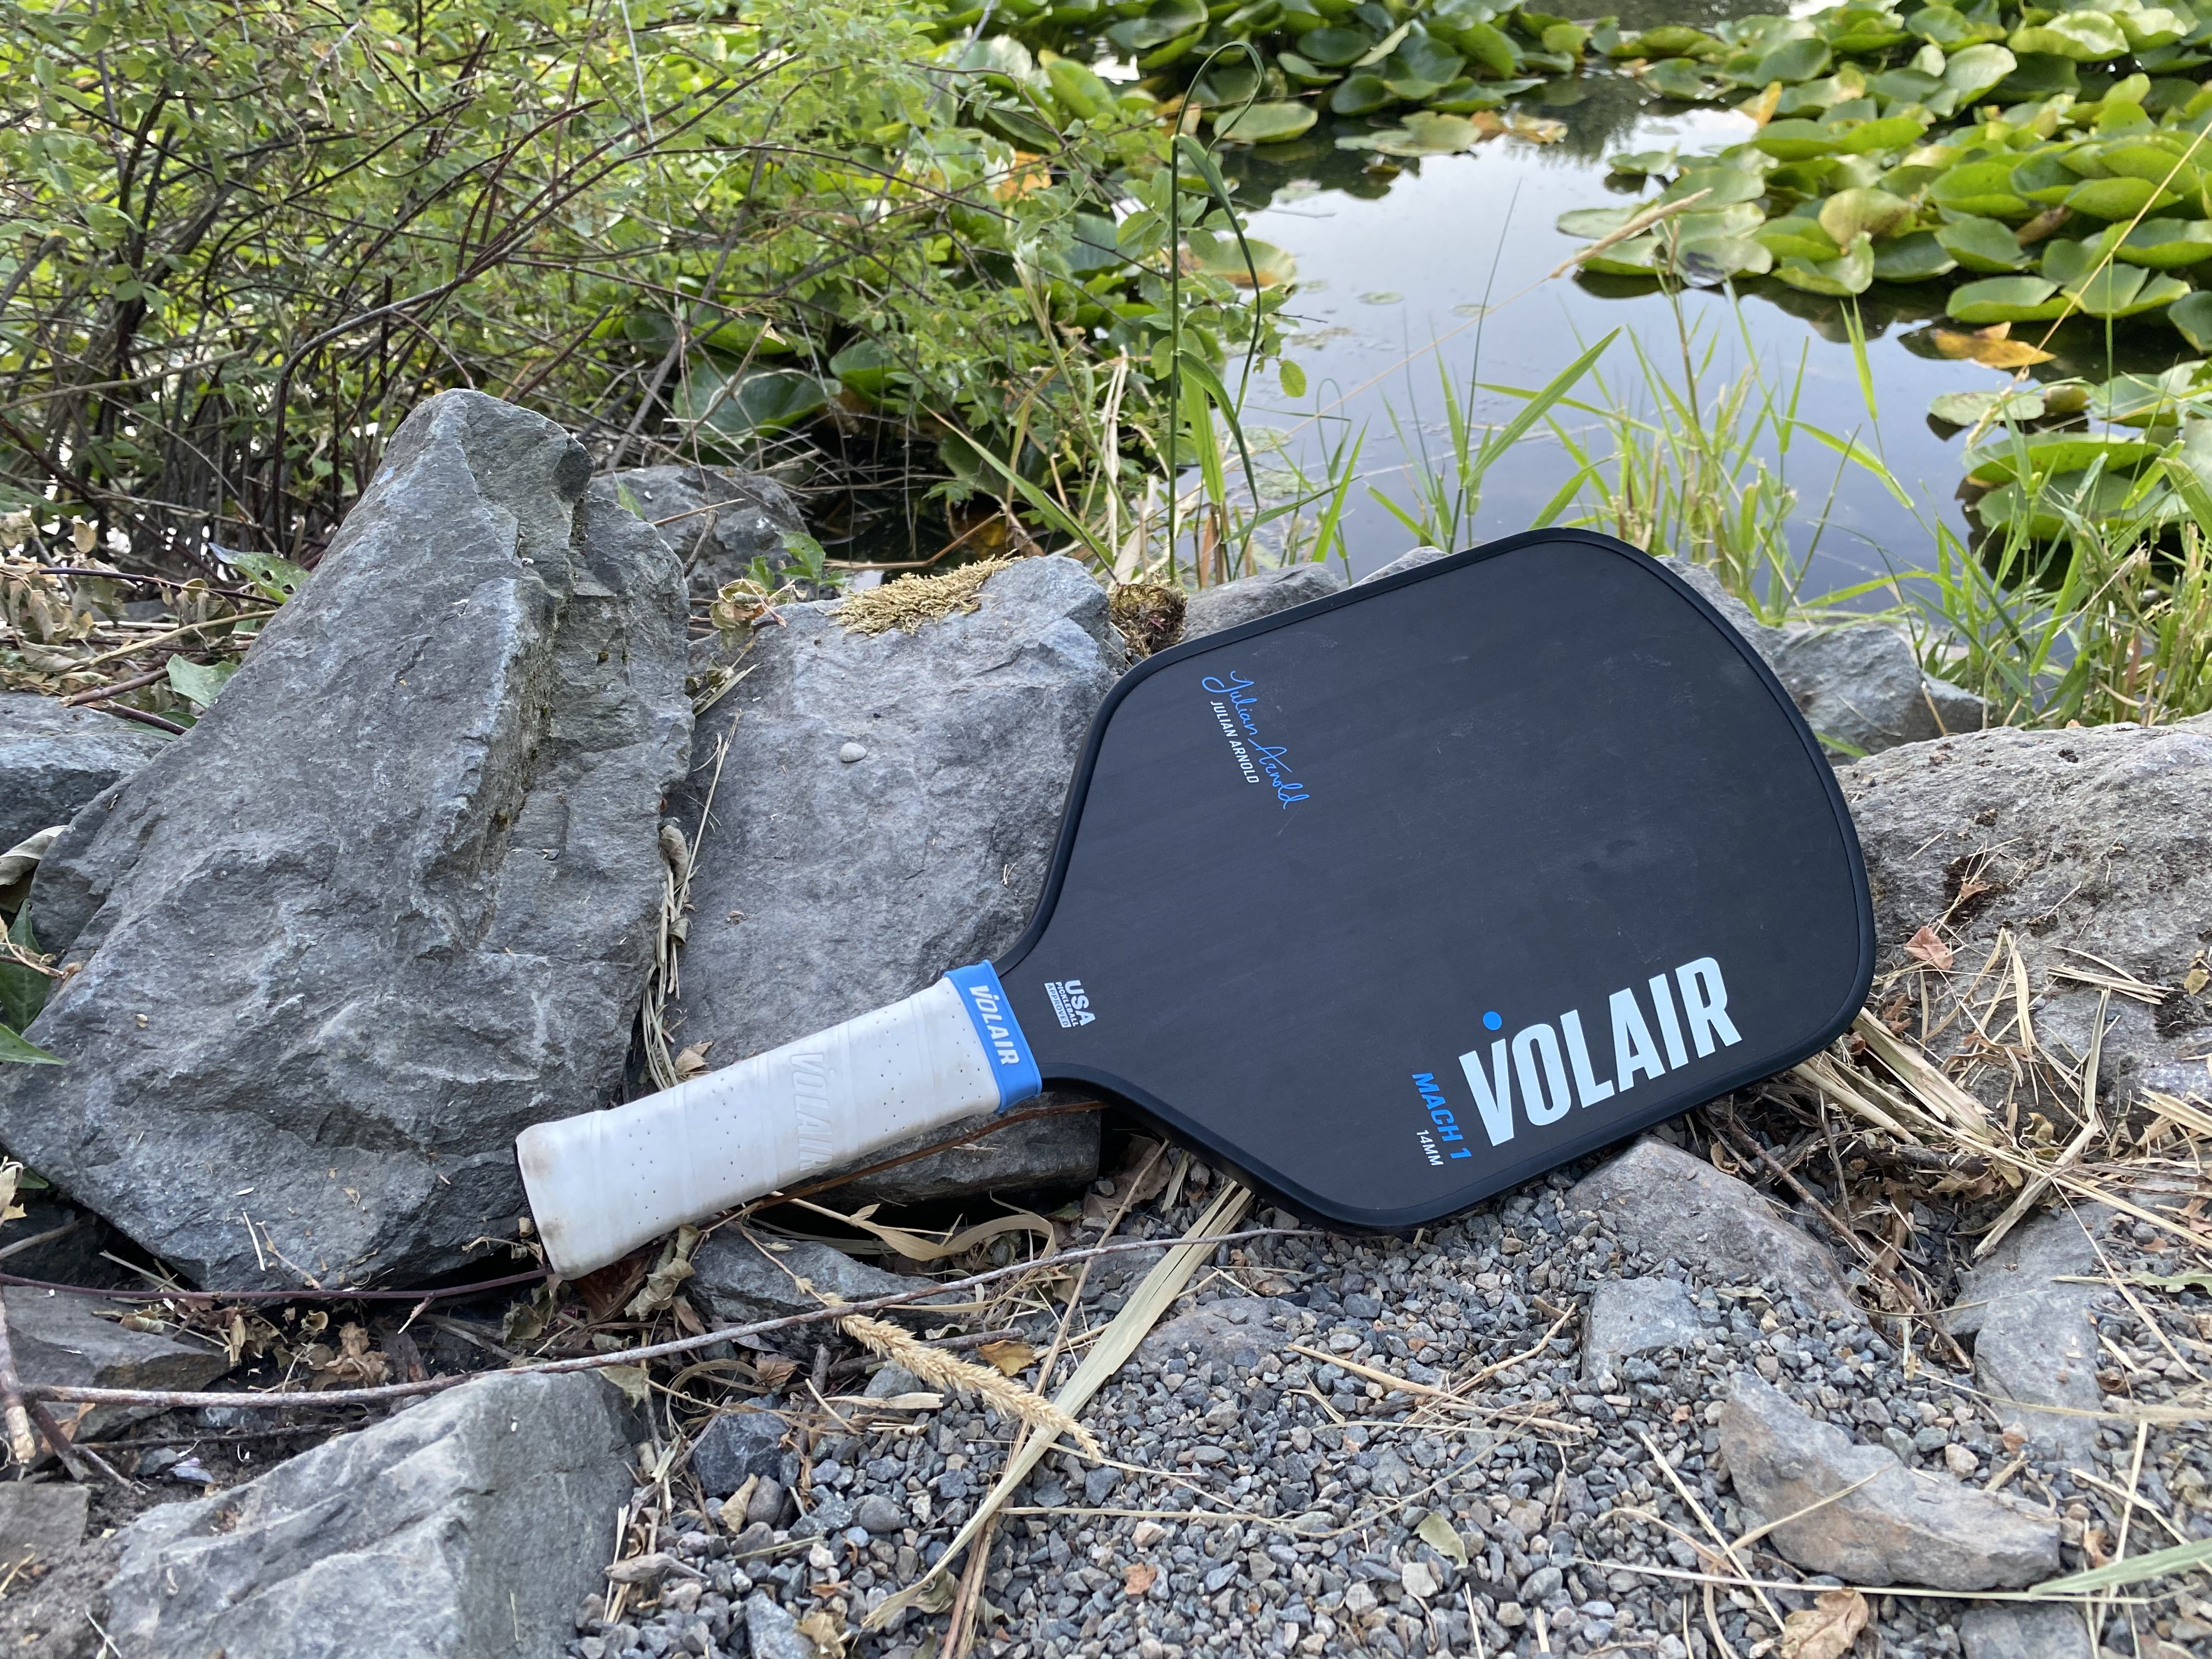 The Volair Mach 1 pickleball paddle resting against a rock